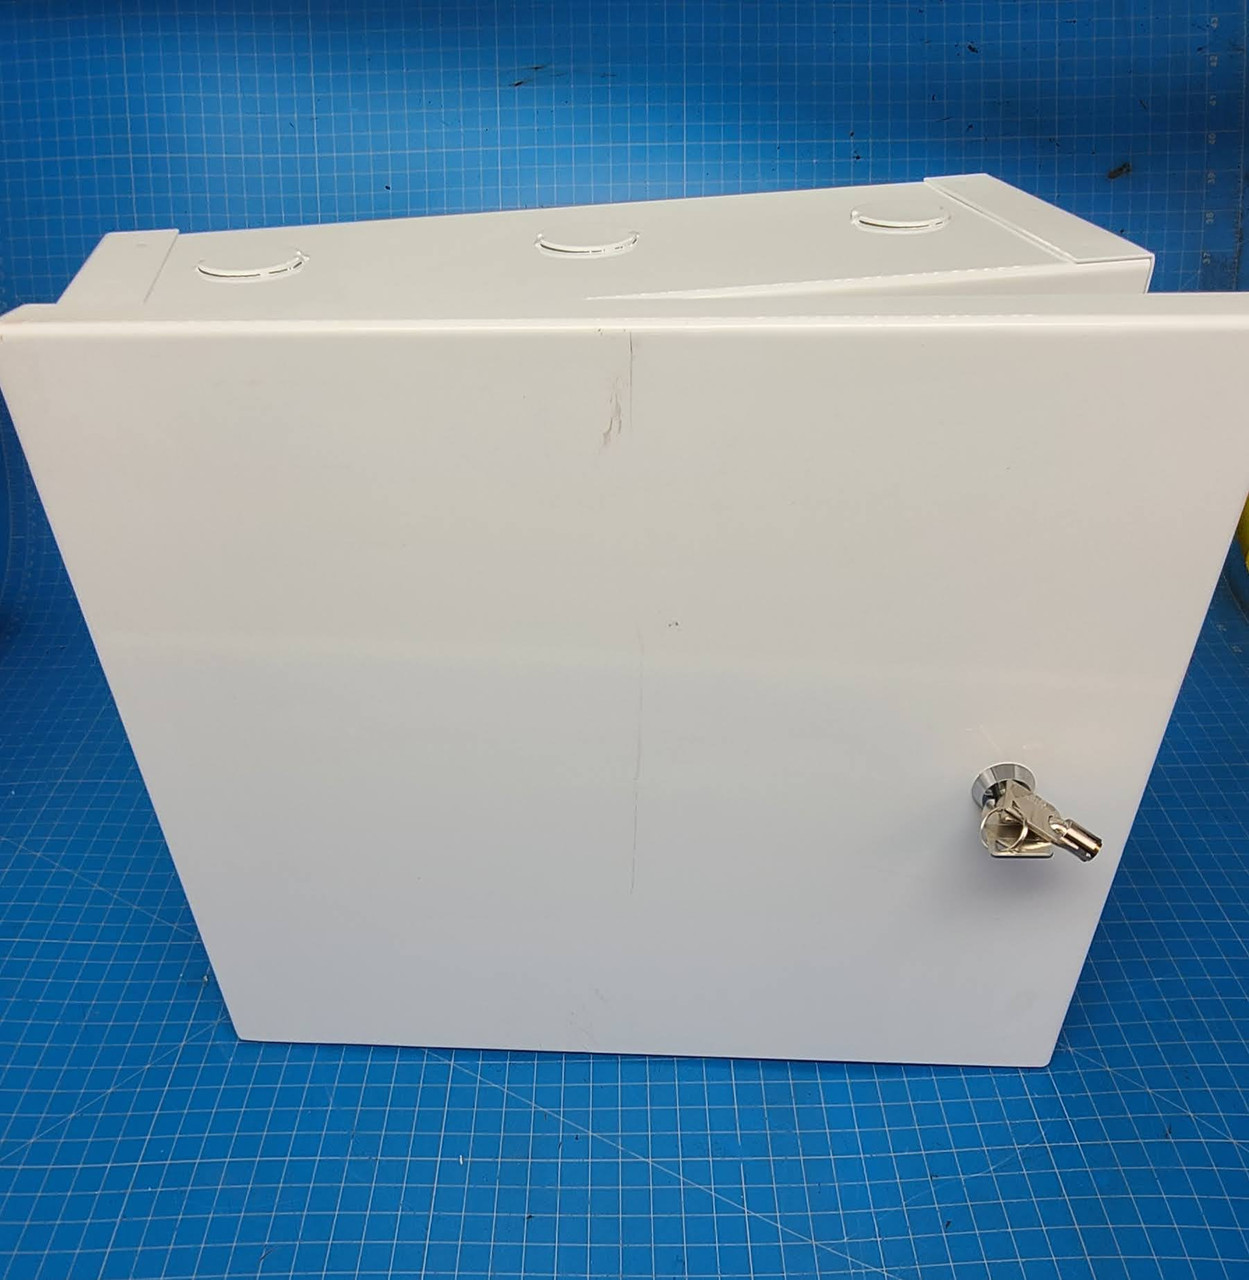 Multi-Purpose Industrial Lockable Cabinet 36 x 28 x 10 White Steel Surface Mounted NO KOs CAB243